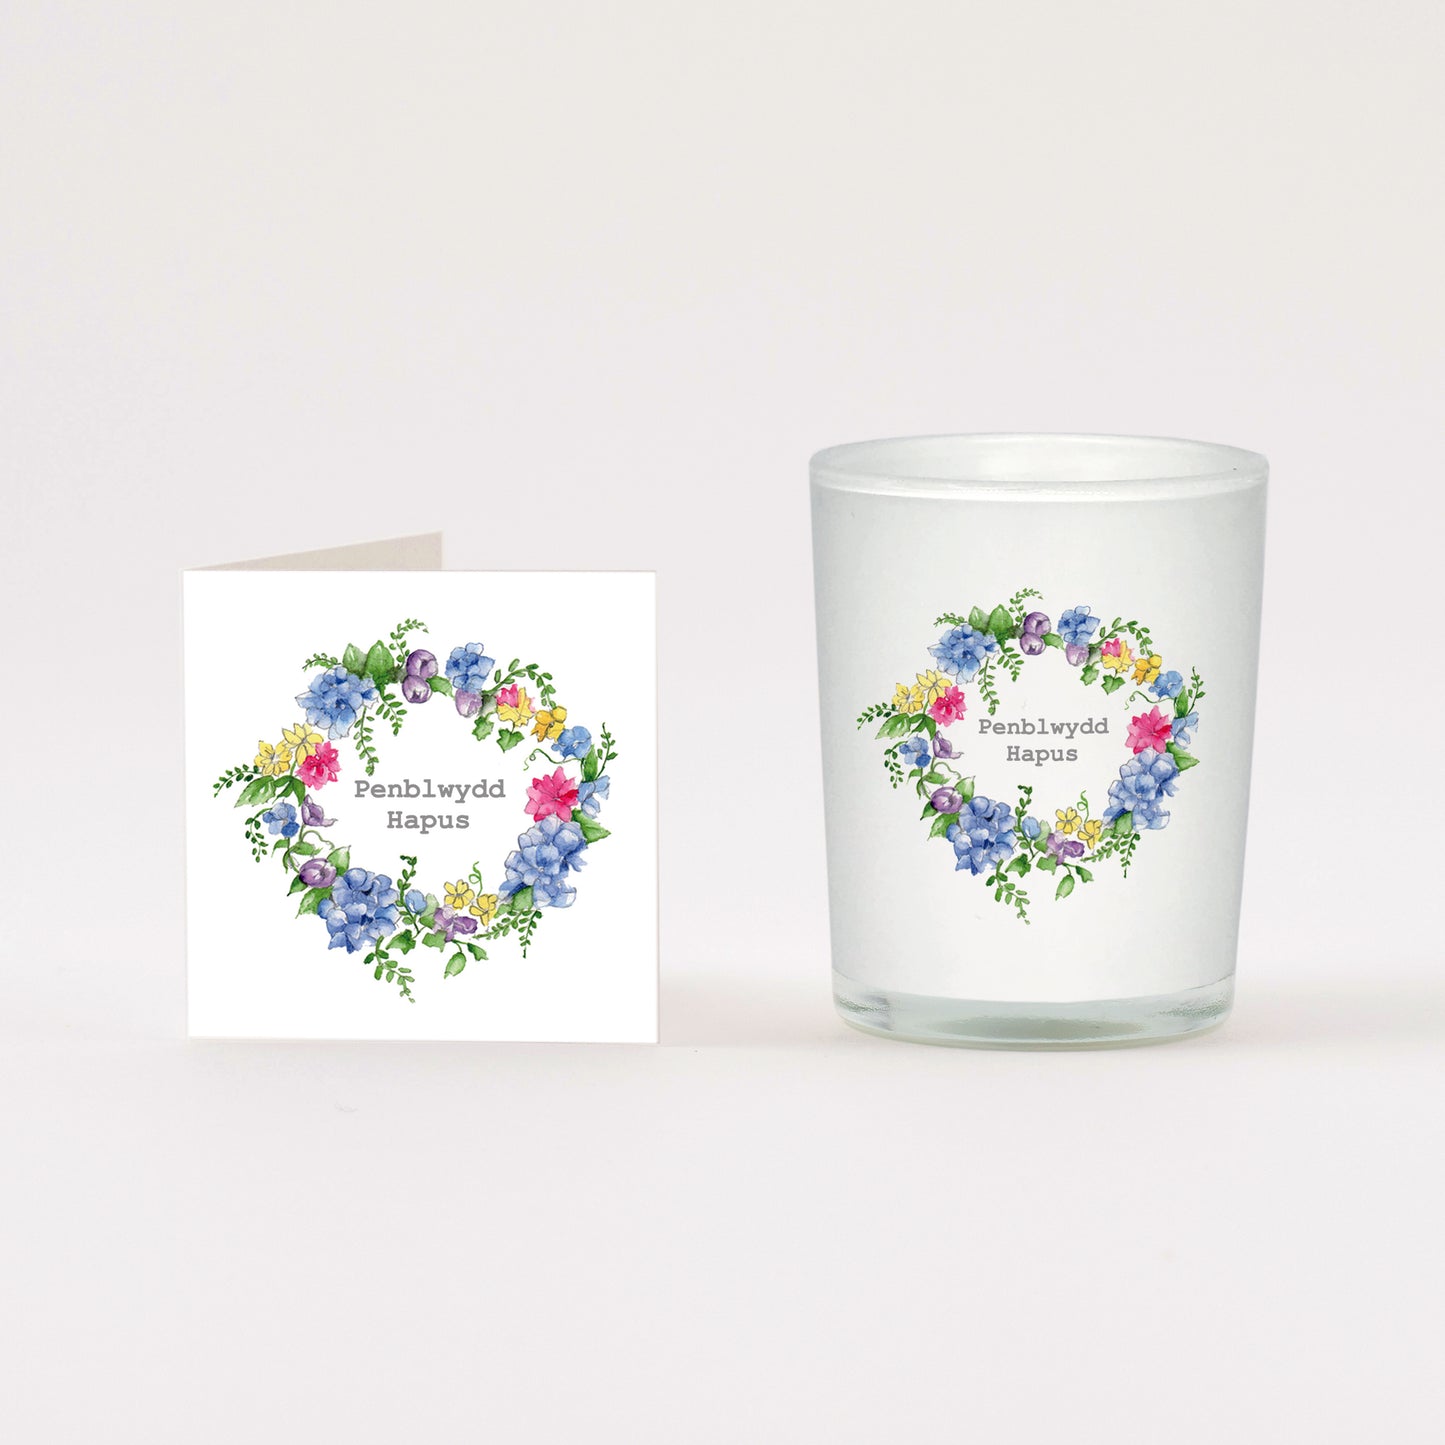 Boxed Welsh Penblwydd Hapus Happy Birthday Candle and Greeting Card Candles Crumble and Core   